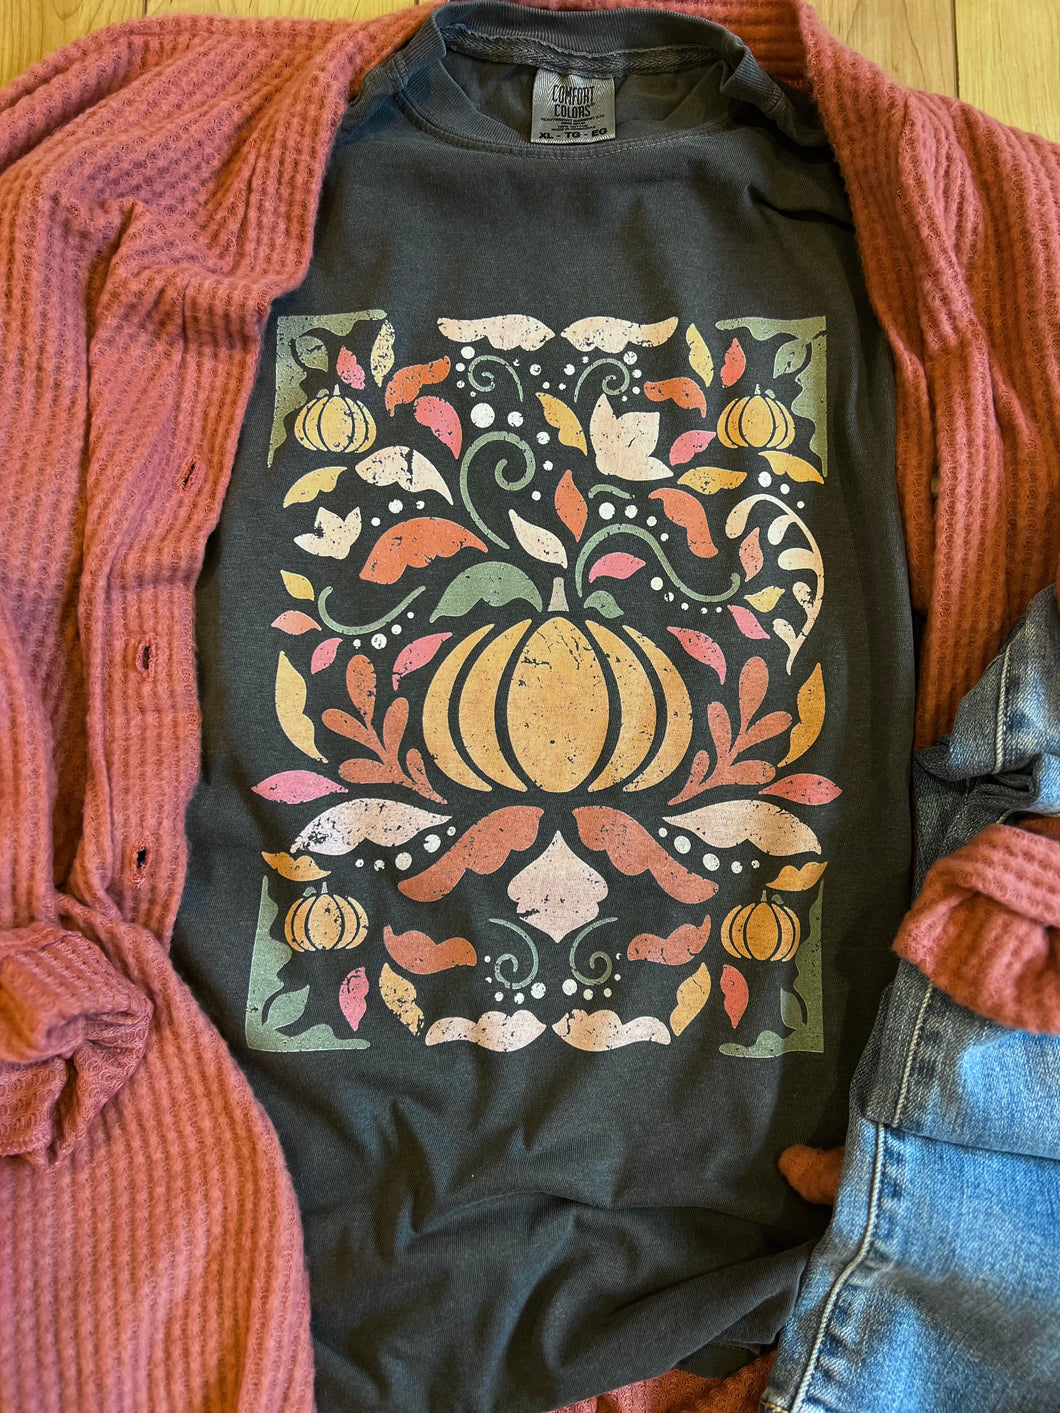 Fall Floral Graphic Tee PREORDER (SHIP DATE 9/8)